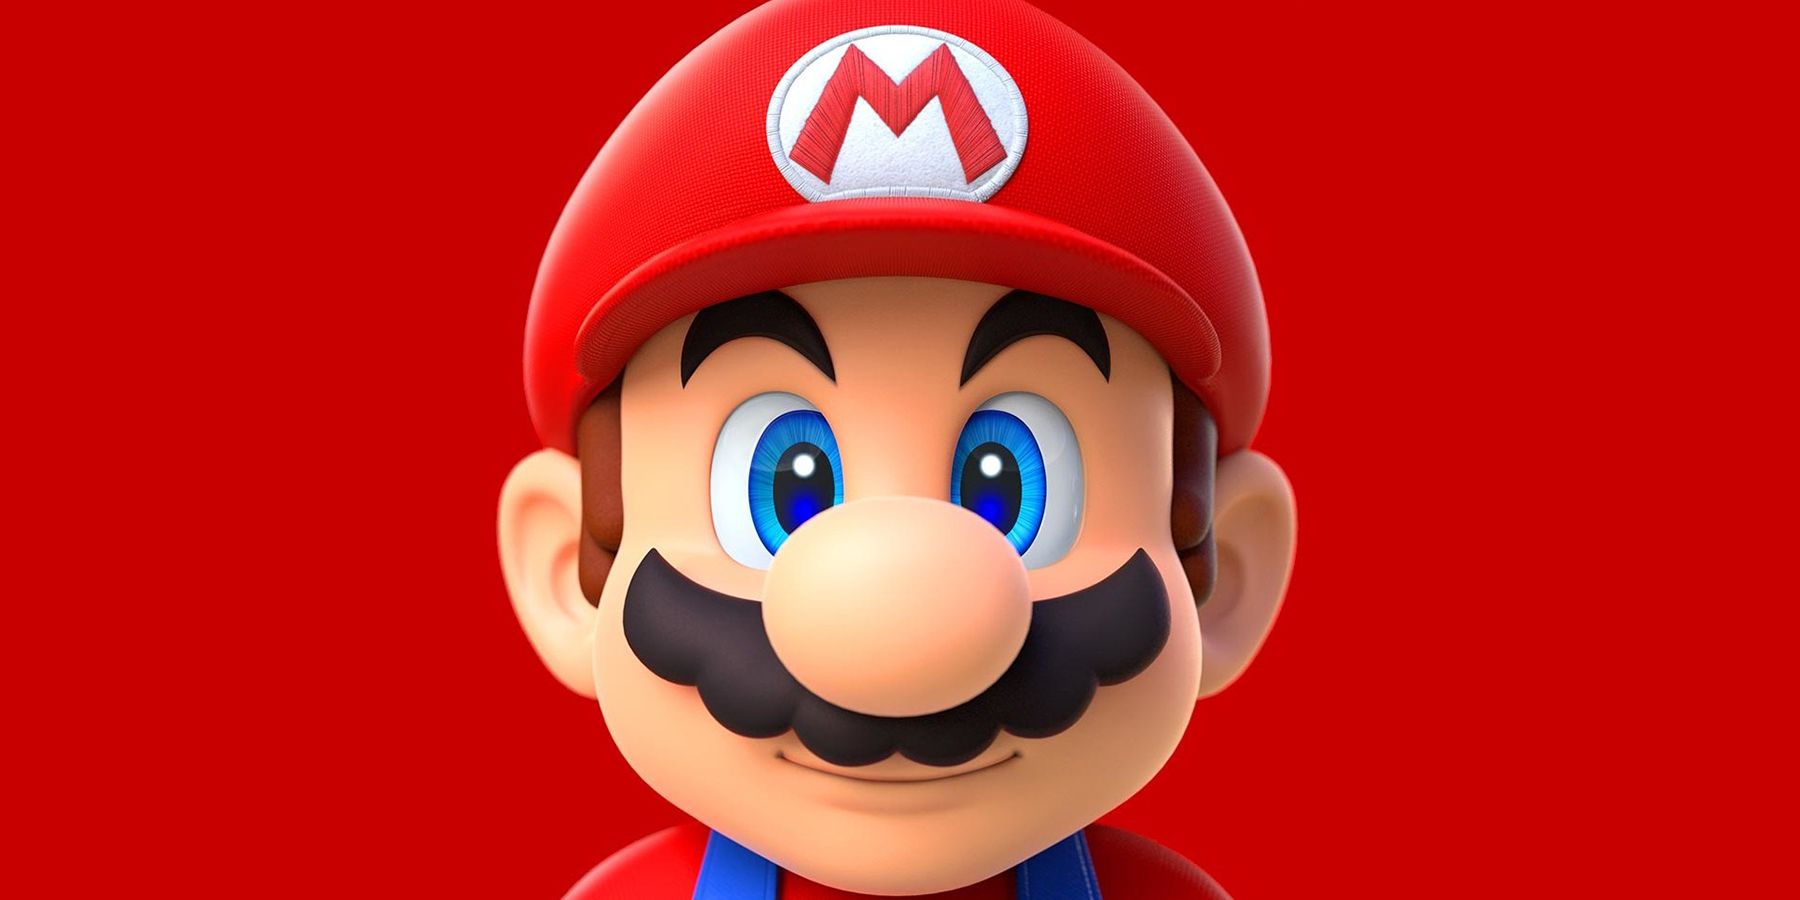 Super Mario on a red background